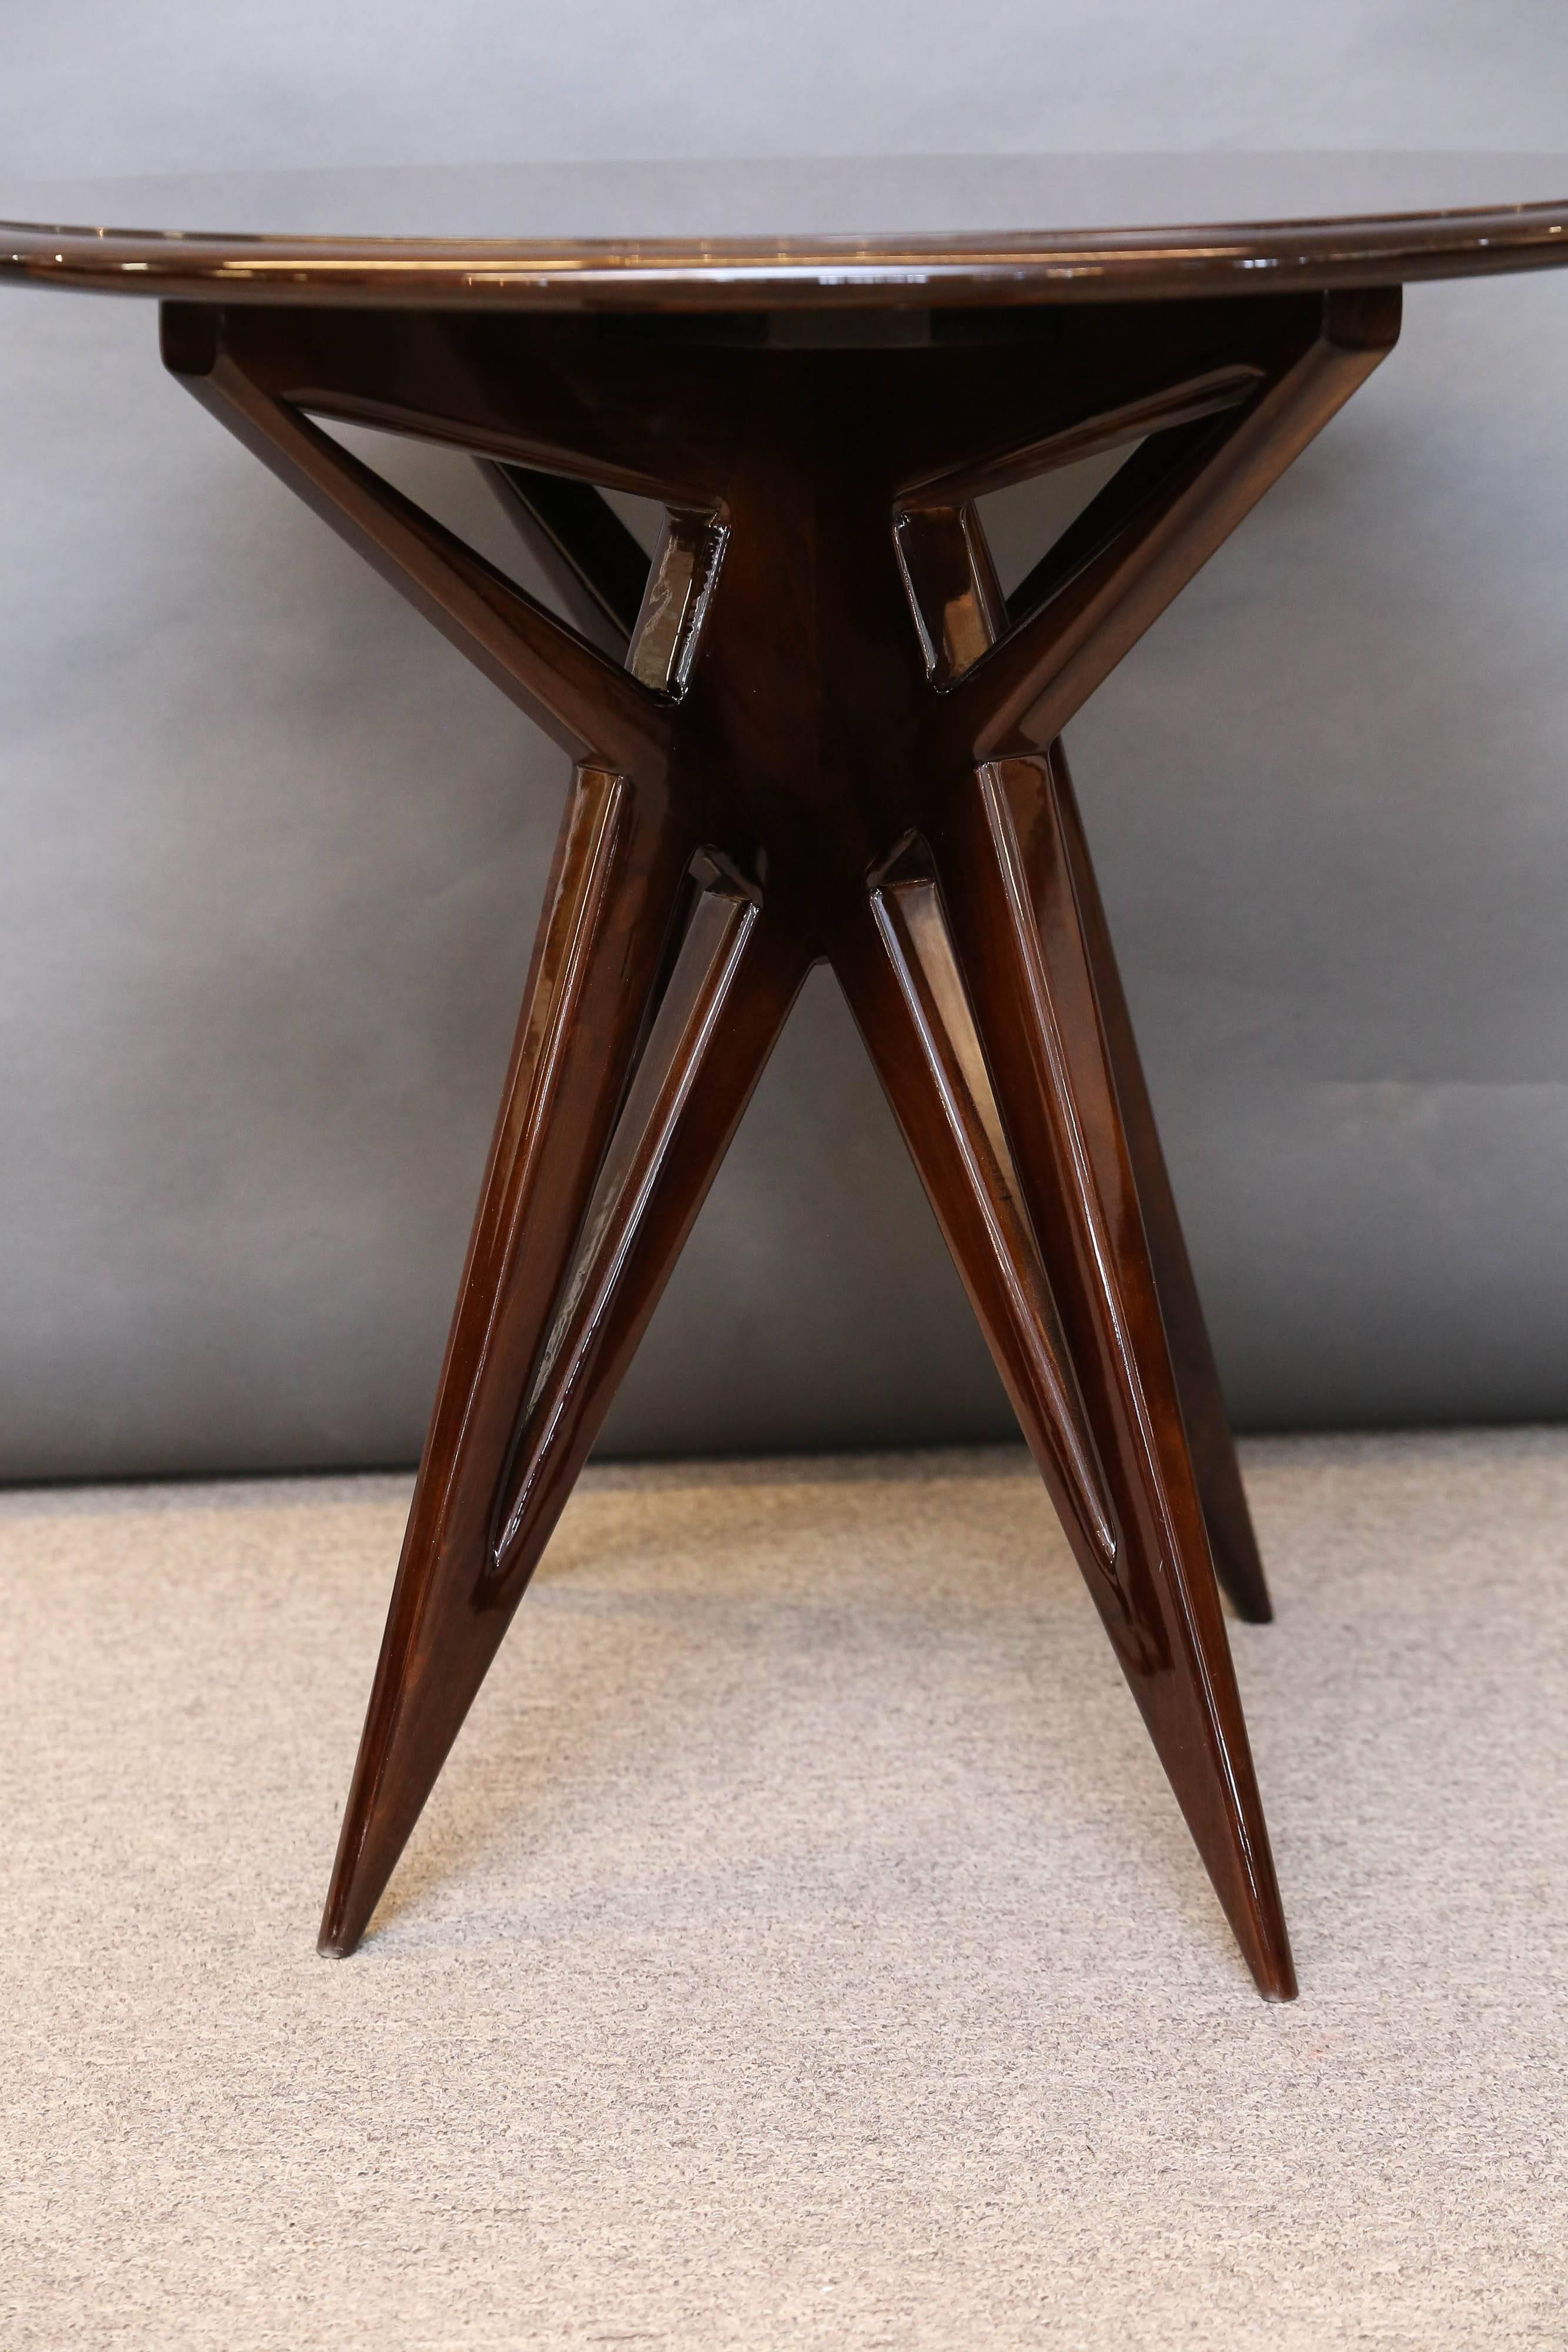 Table top has round highly polished form that presents high quality walnut wood grain. Each table is elevated by three pointy legs that have decorative opening in the middle. 

 Condition is perfect. Restored. 

 France, circa 1940s.

 Measures: